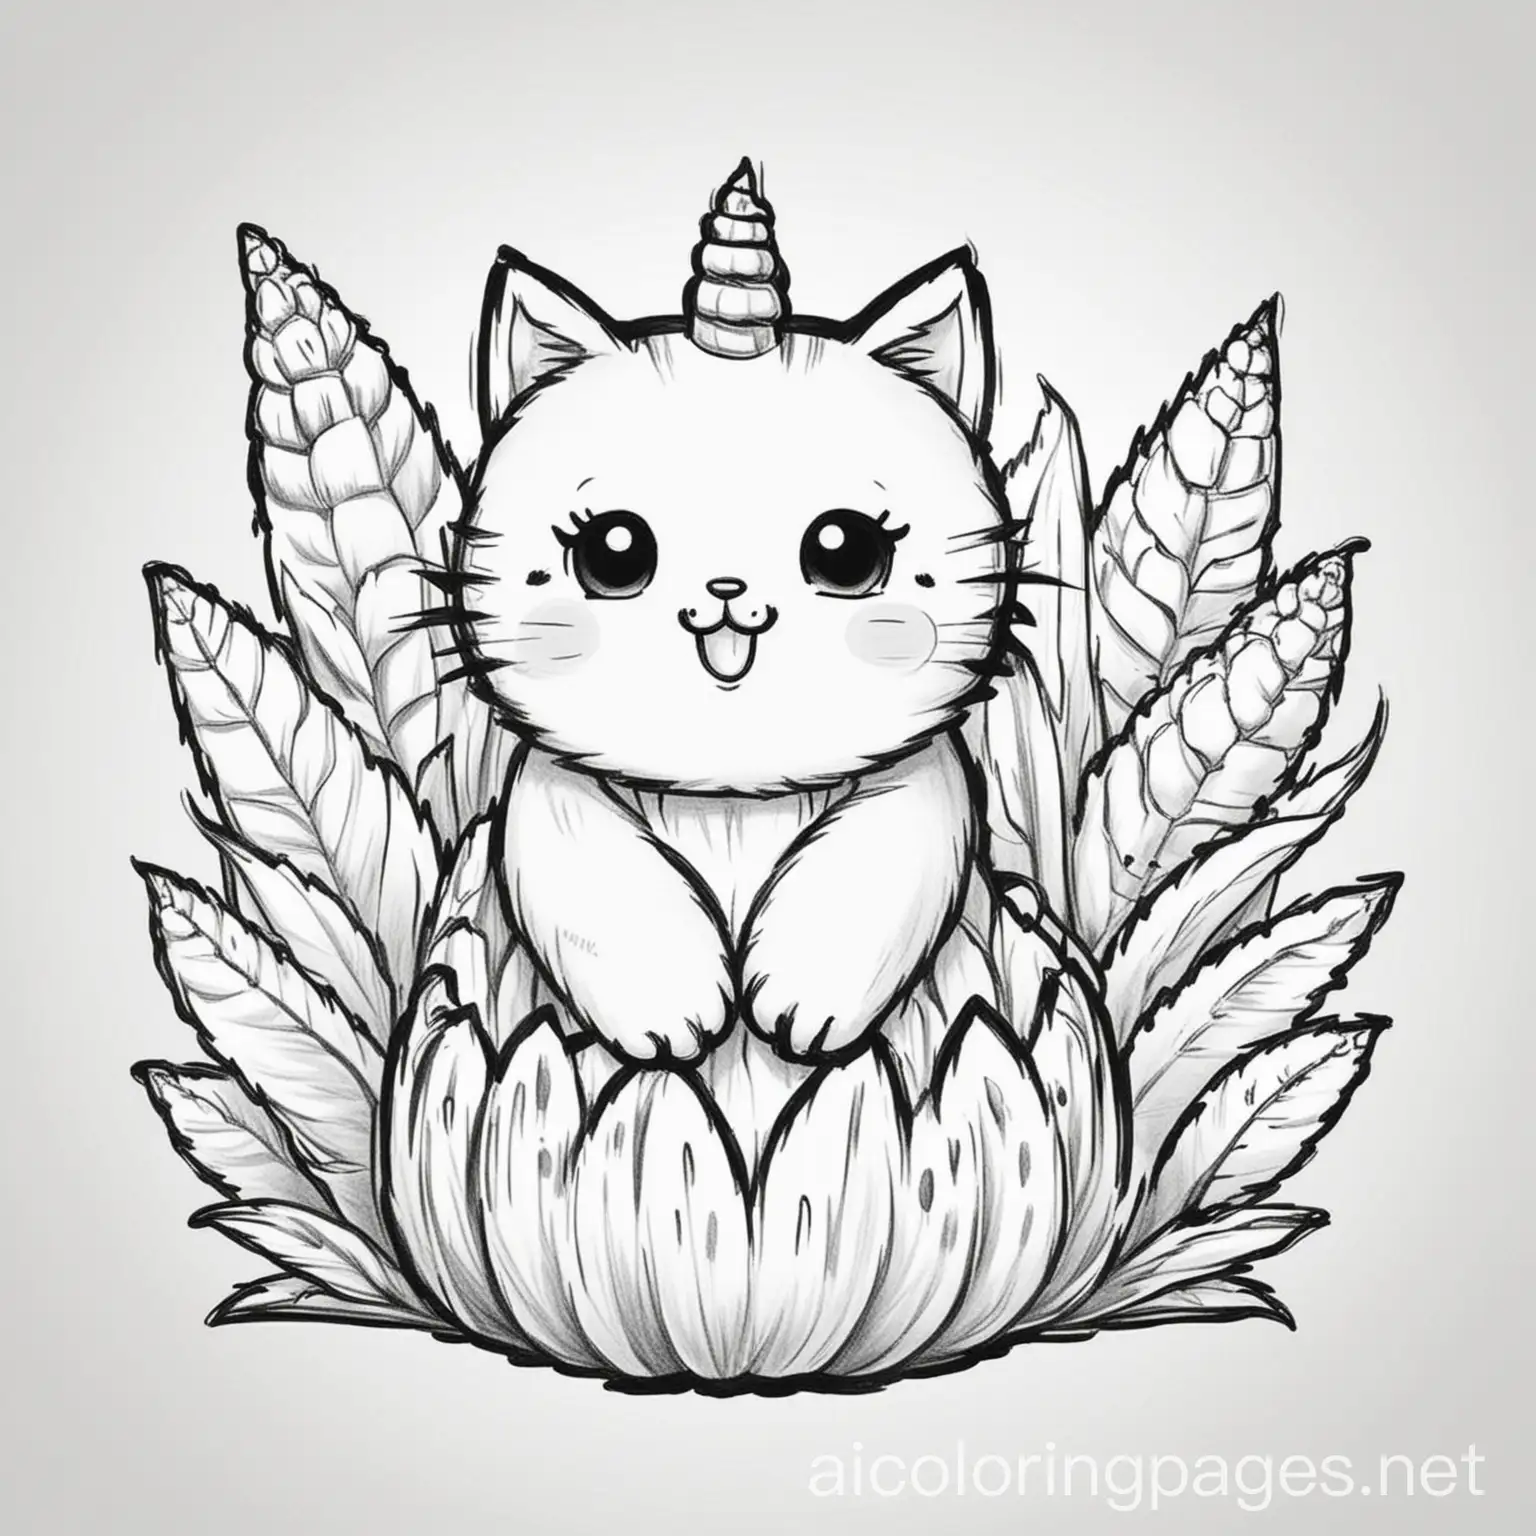 coloring book in black and white cute Kity corn, Coloring Page, black and white, line art, white background, Simplicity, Ample White Space